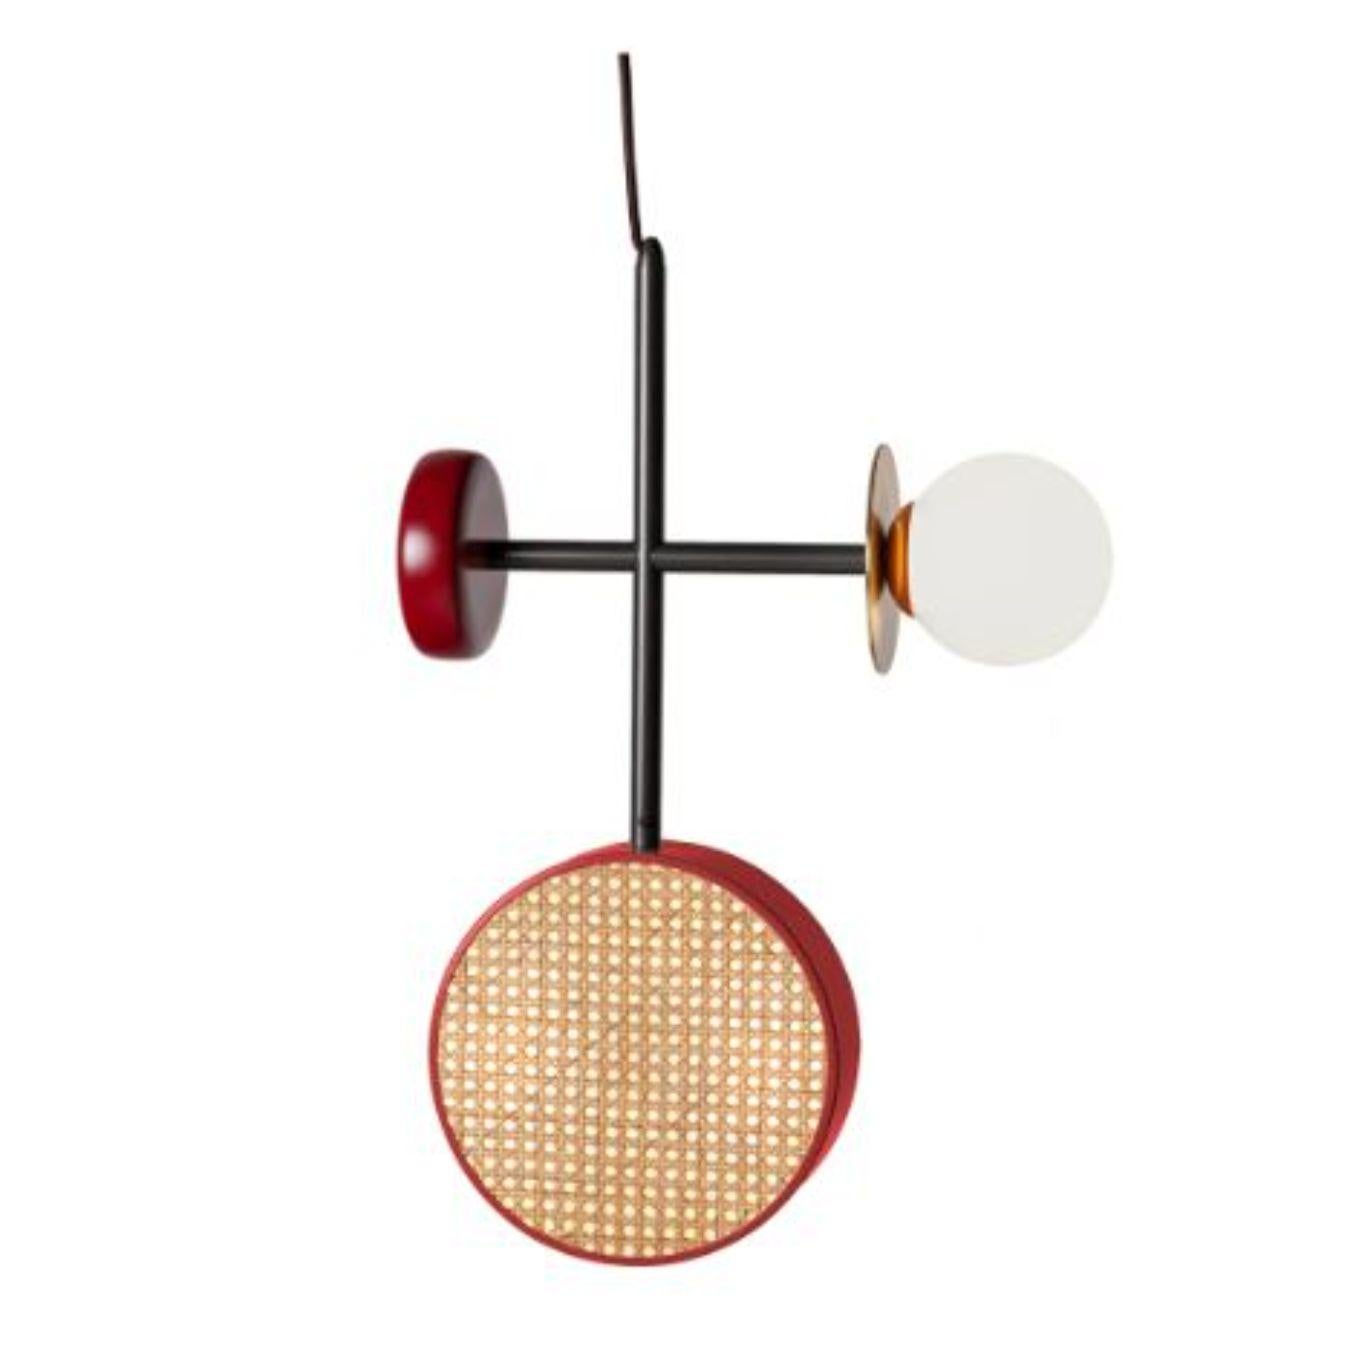 Monaco III suspension lamp by Dooq
Dimensions: W 44 x D 15 x H 70 cm
Materials: lacquered metal, brass/nickel, rattan and wood spheres.

Information:
230V/50Hz
3 x max. G9
4W LED

120V/60Hz
3 x max. G9
4W LED

Cable: 59”/1,5m

All our